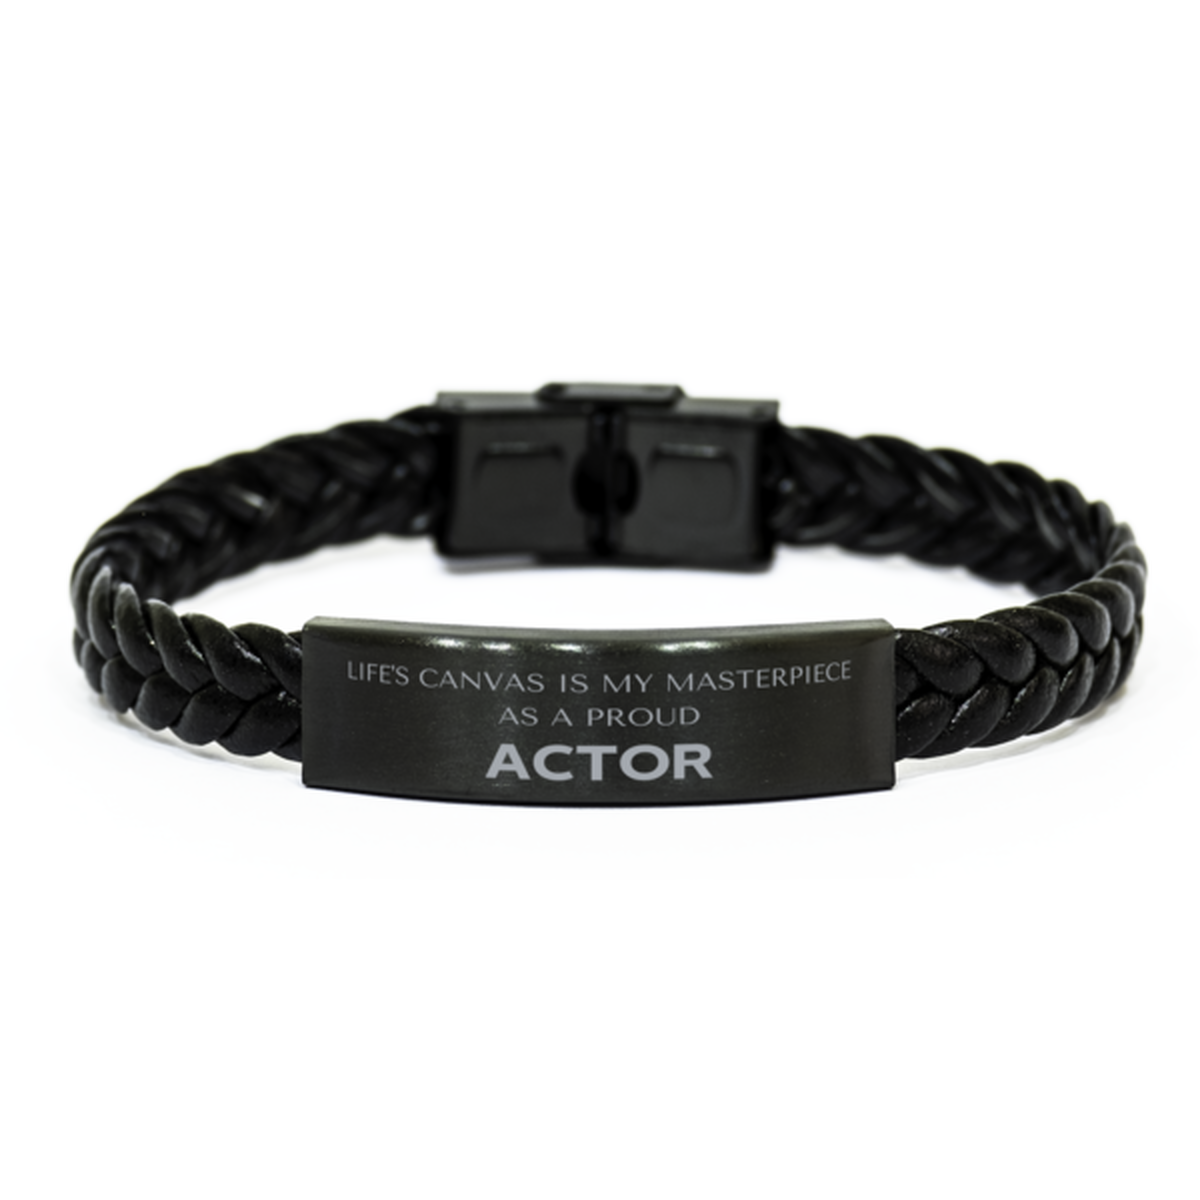 Proud Actor Gifts, Life's canvas is my masterpiece, Epic Birthday Christmas Unique Braided Leather Bracelet For Actor, Coworkers, Men, Women, Friends